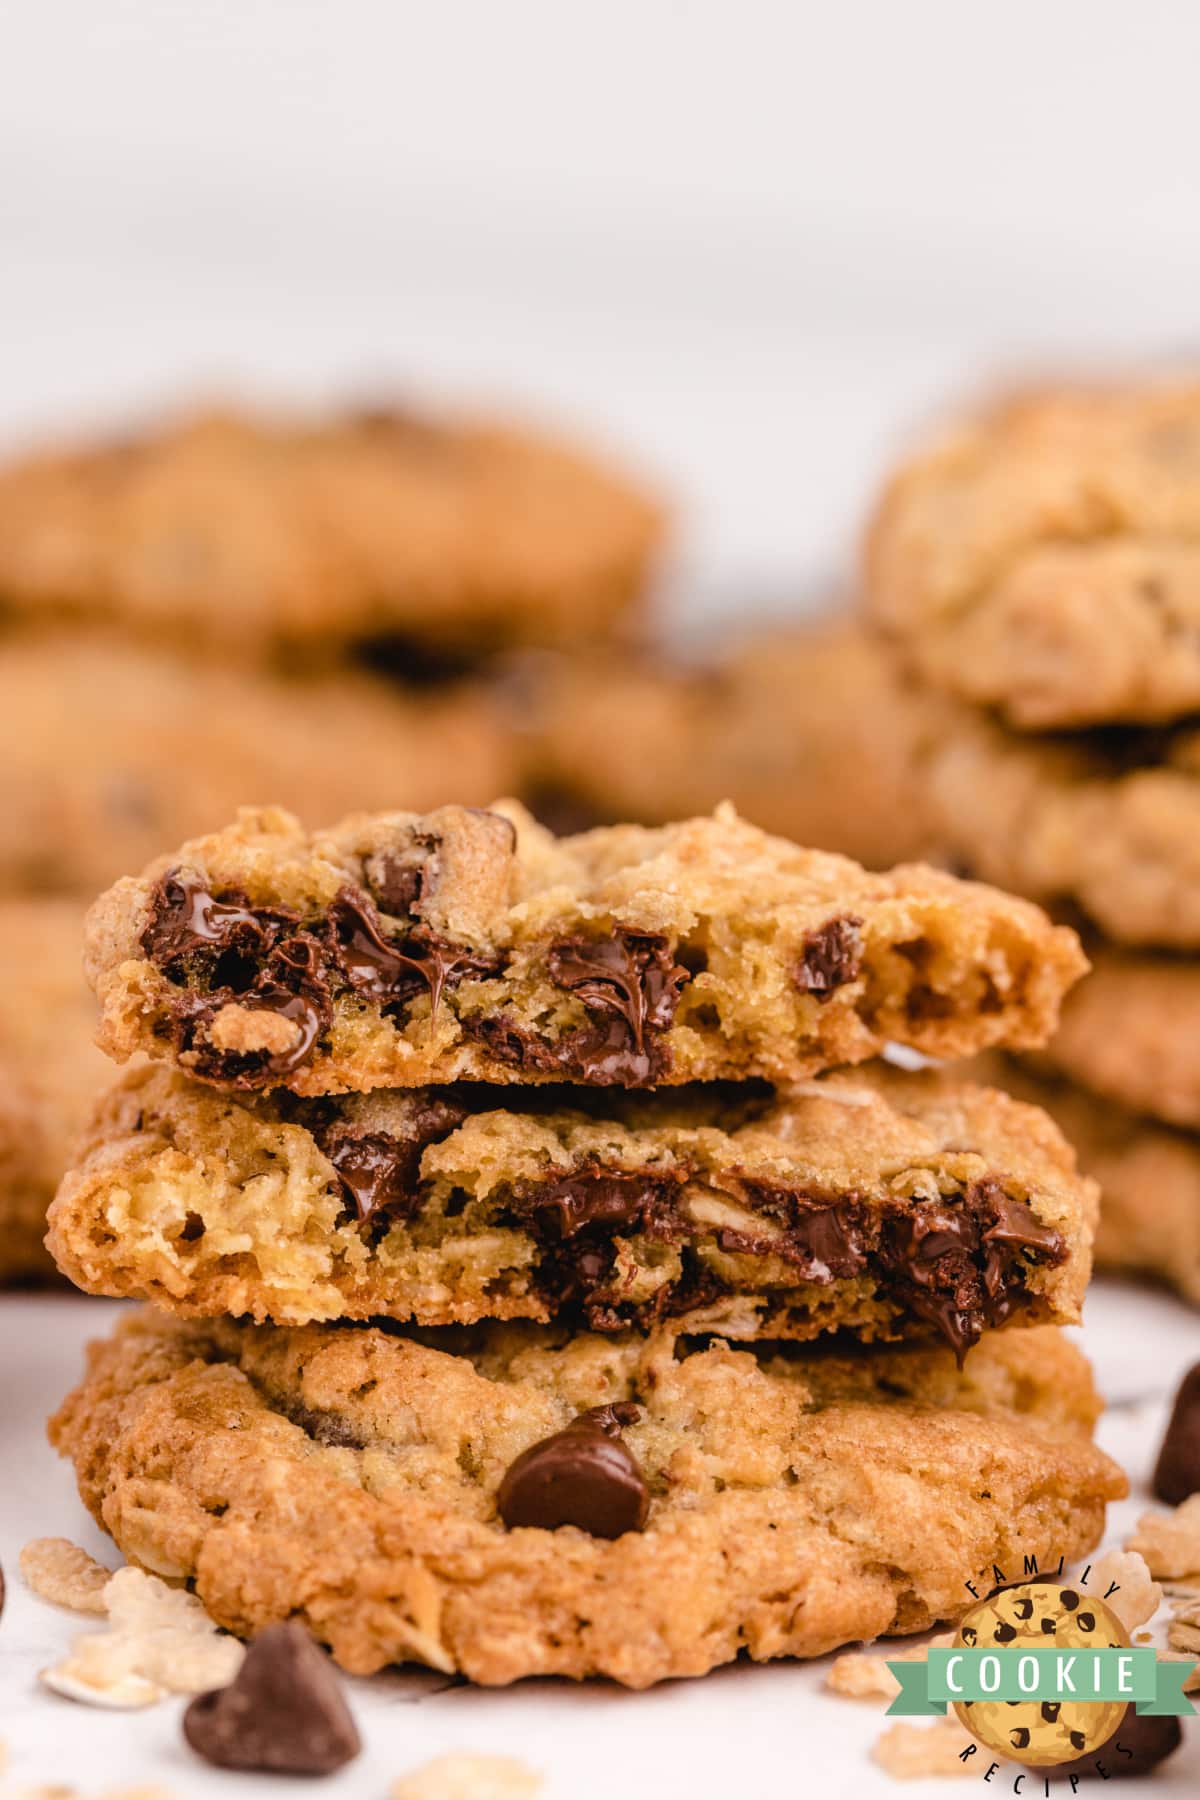 Chocolate Chip Cookies with oats and Rice Krispies